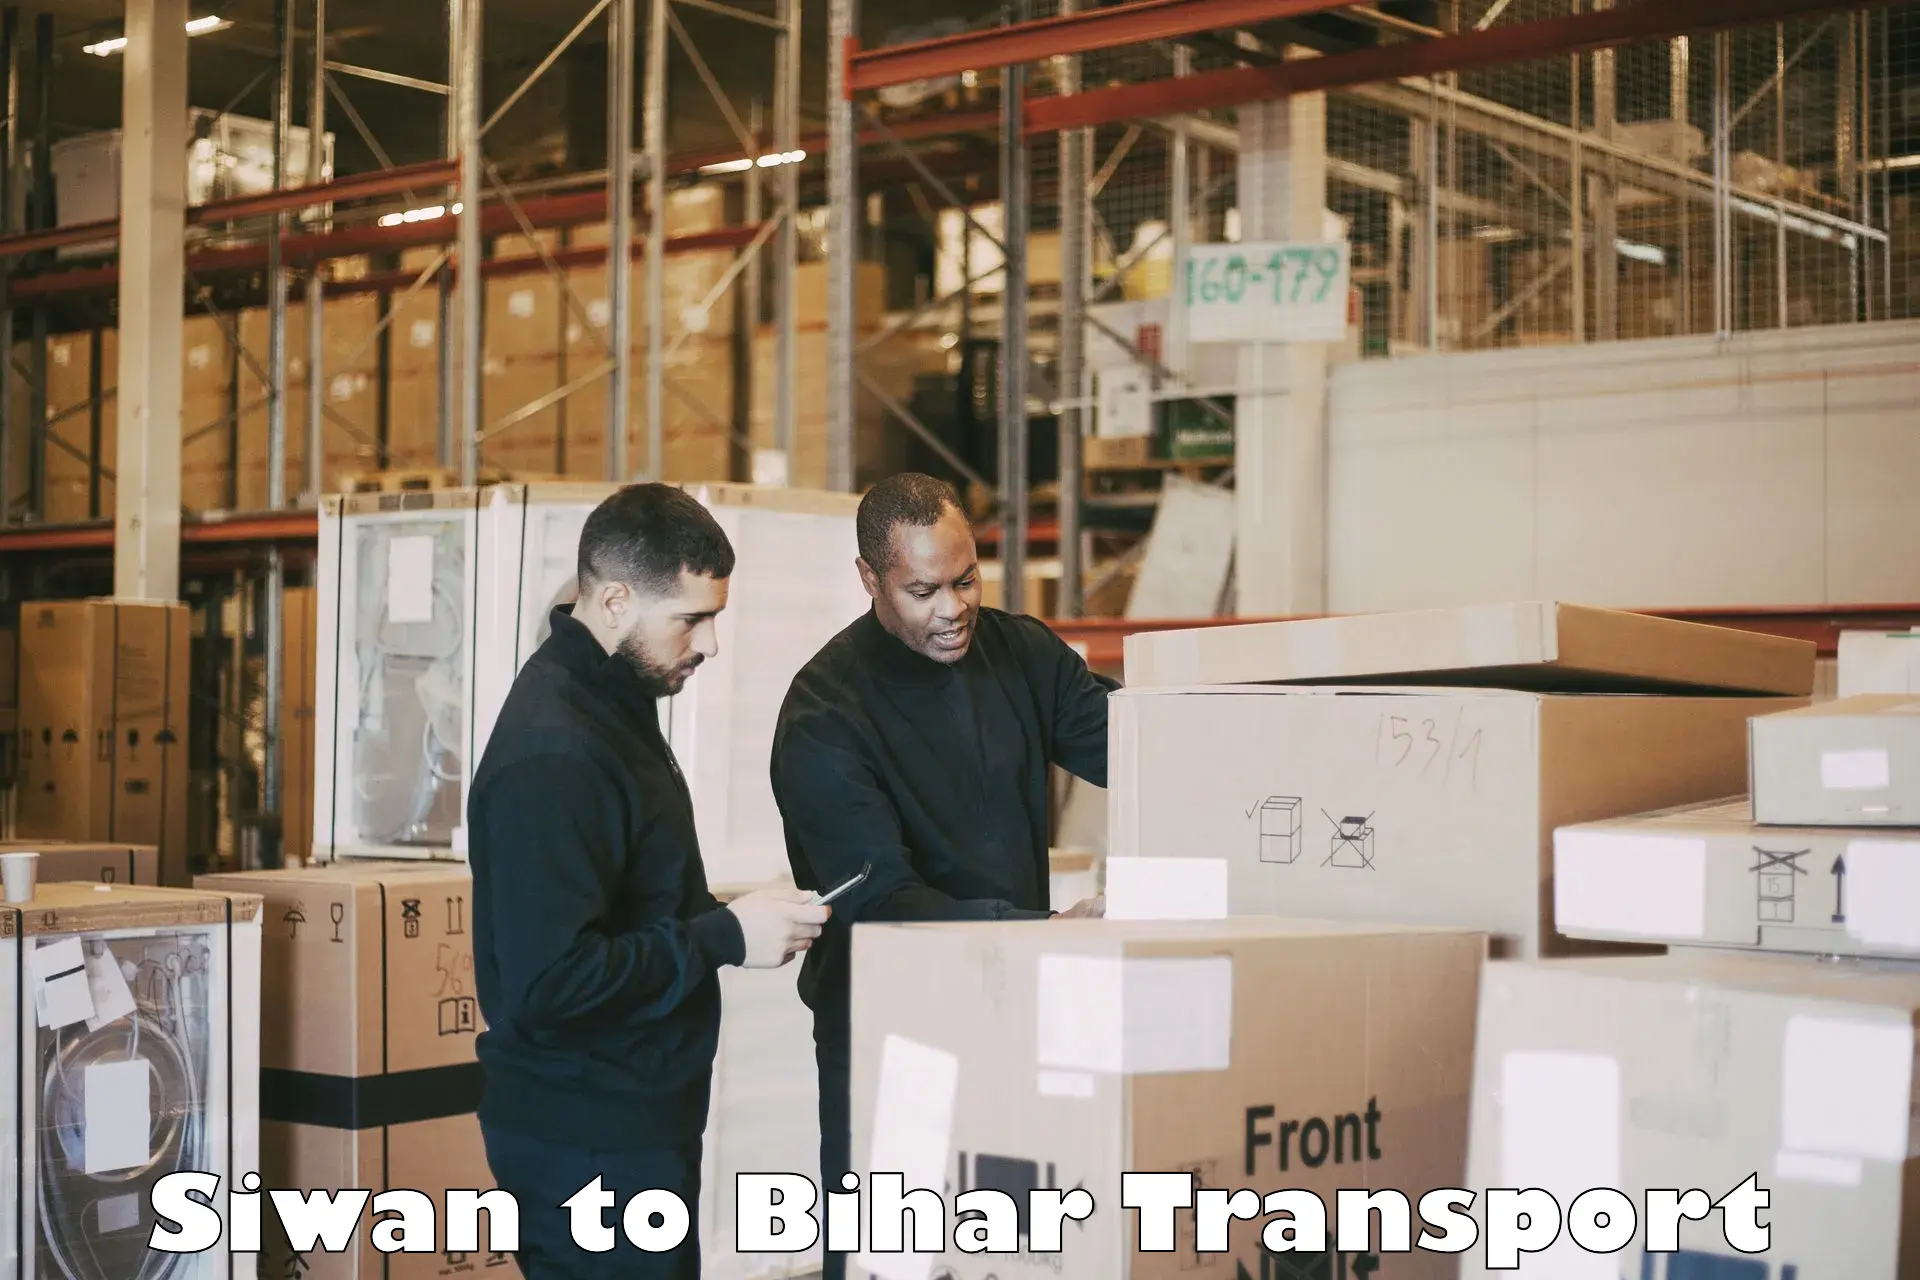 Commercial transport service Siwan to Barhiya